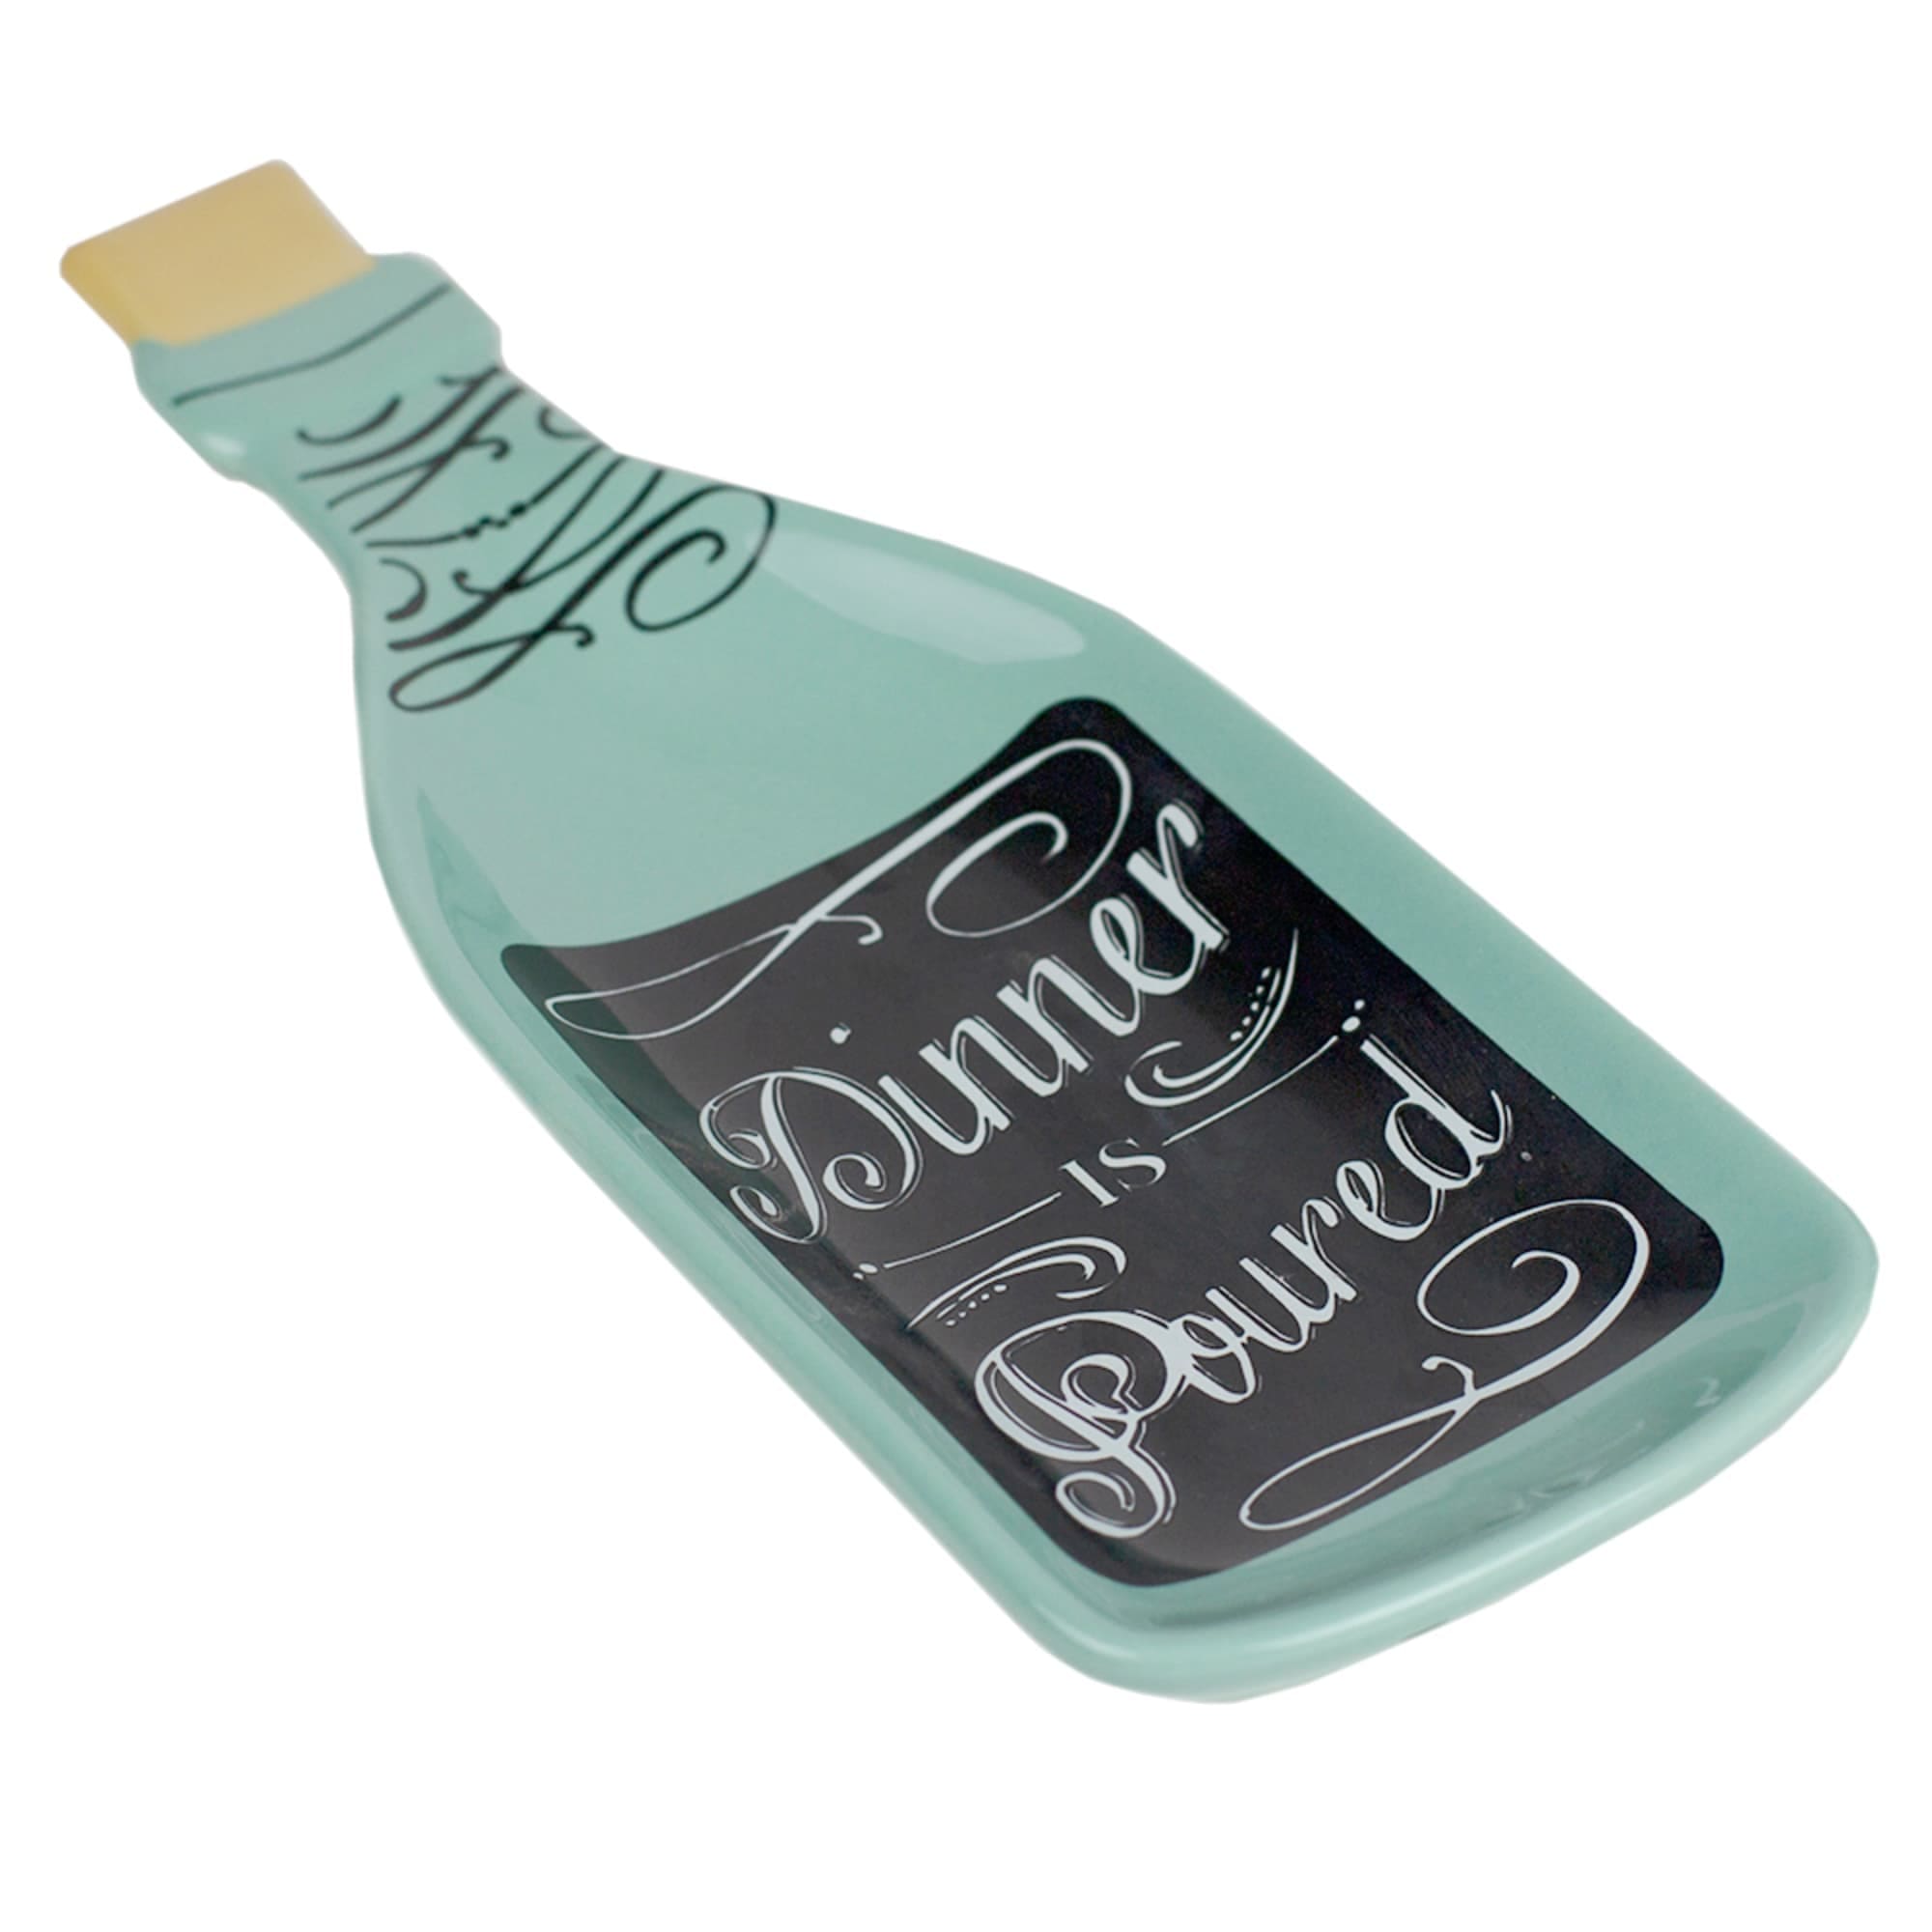 Home Basics Dinner is Poured Wine Shape Ceramic Spoon Rest, Teal $4.00 EACH, CASE PACK OF 24